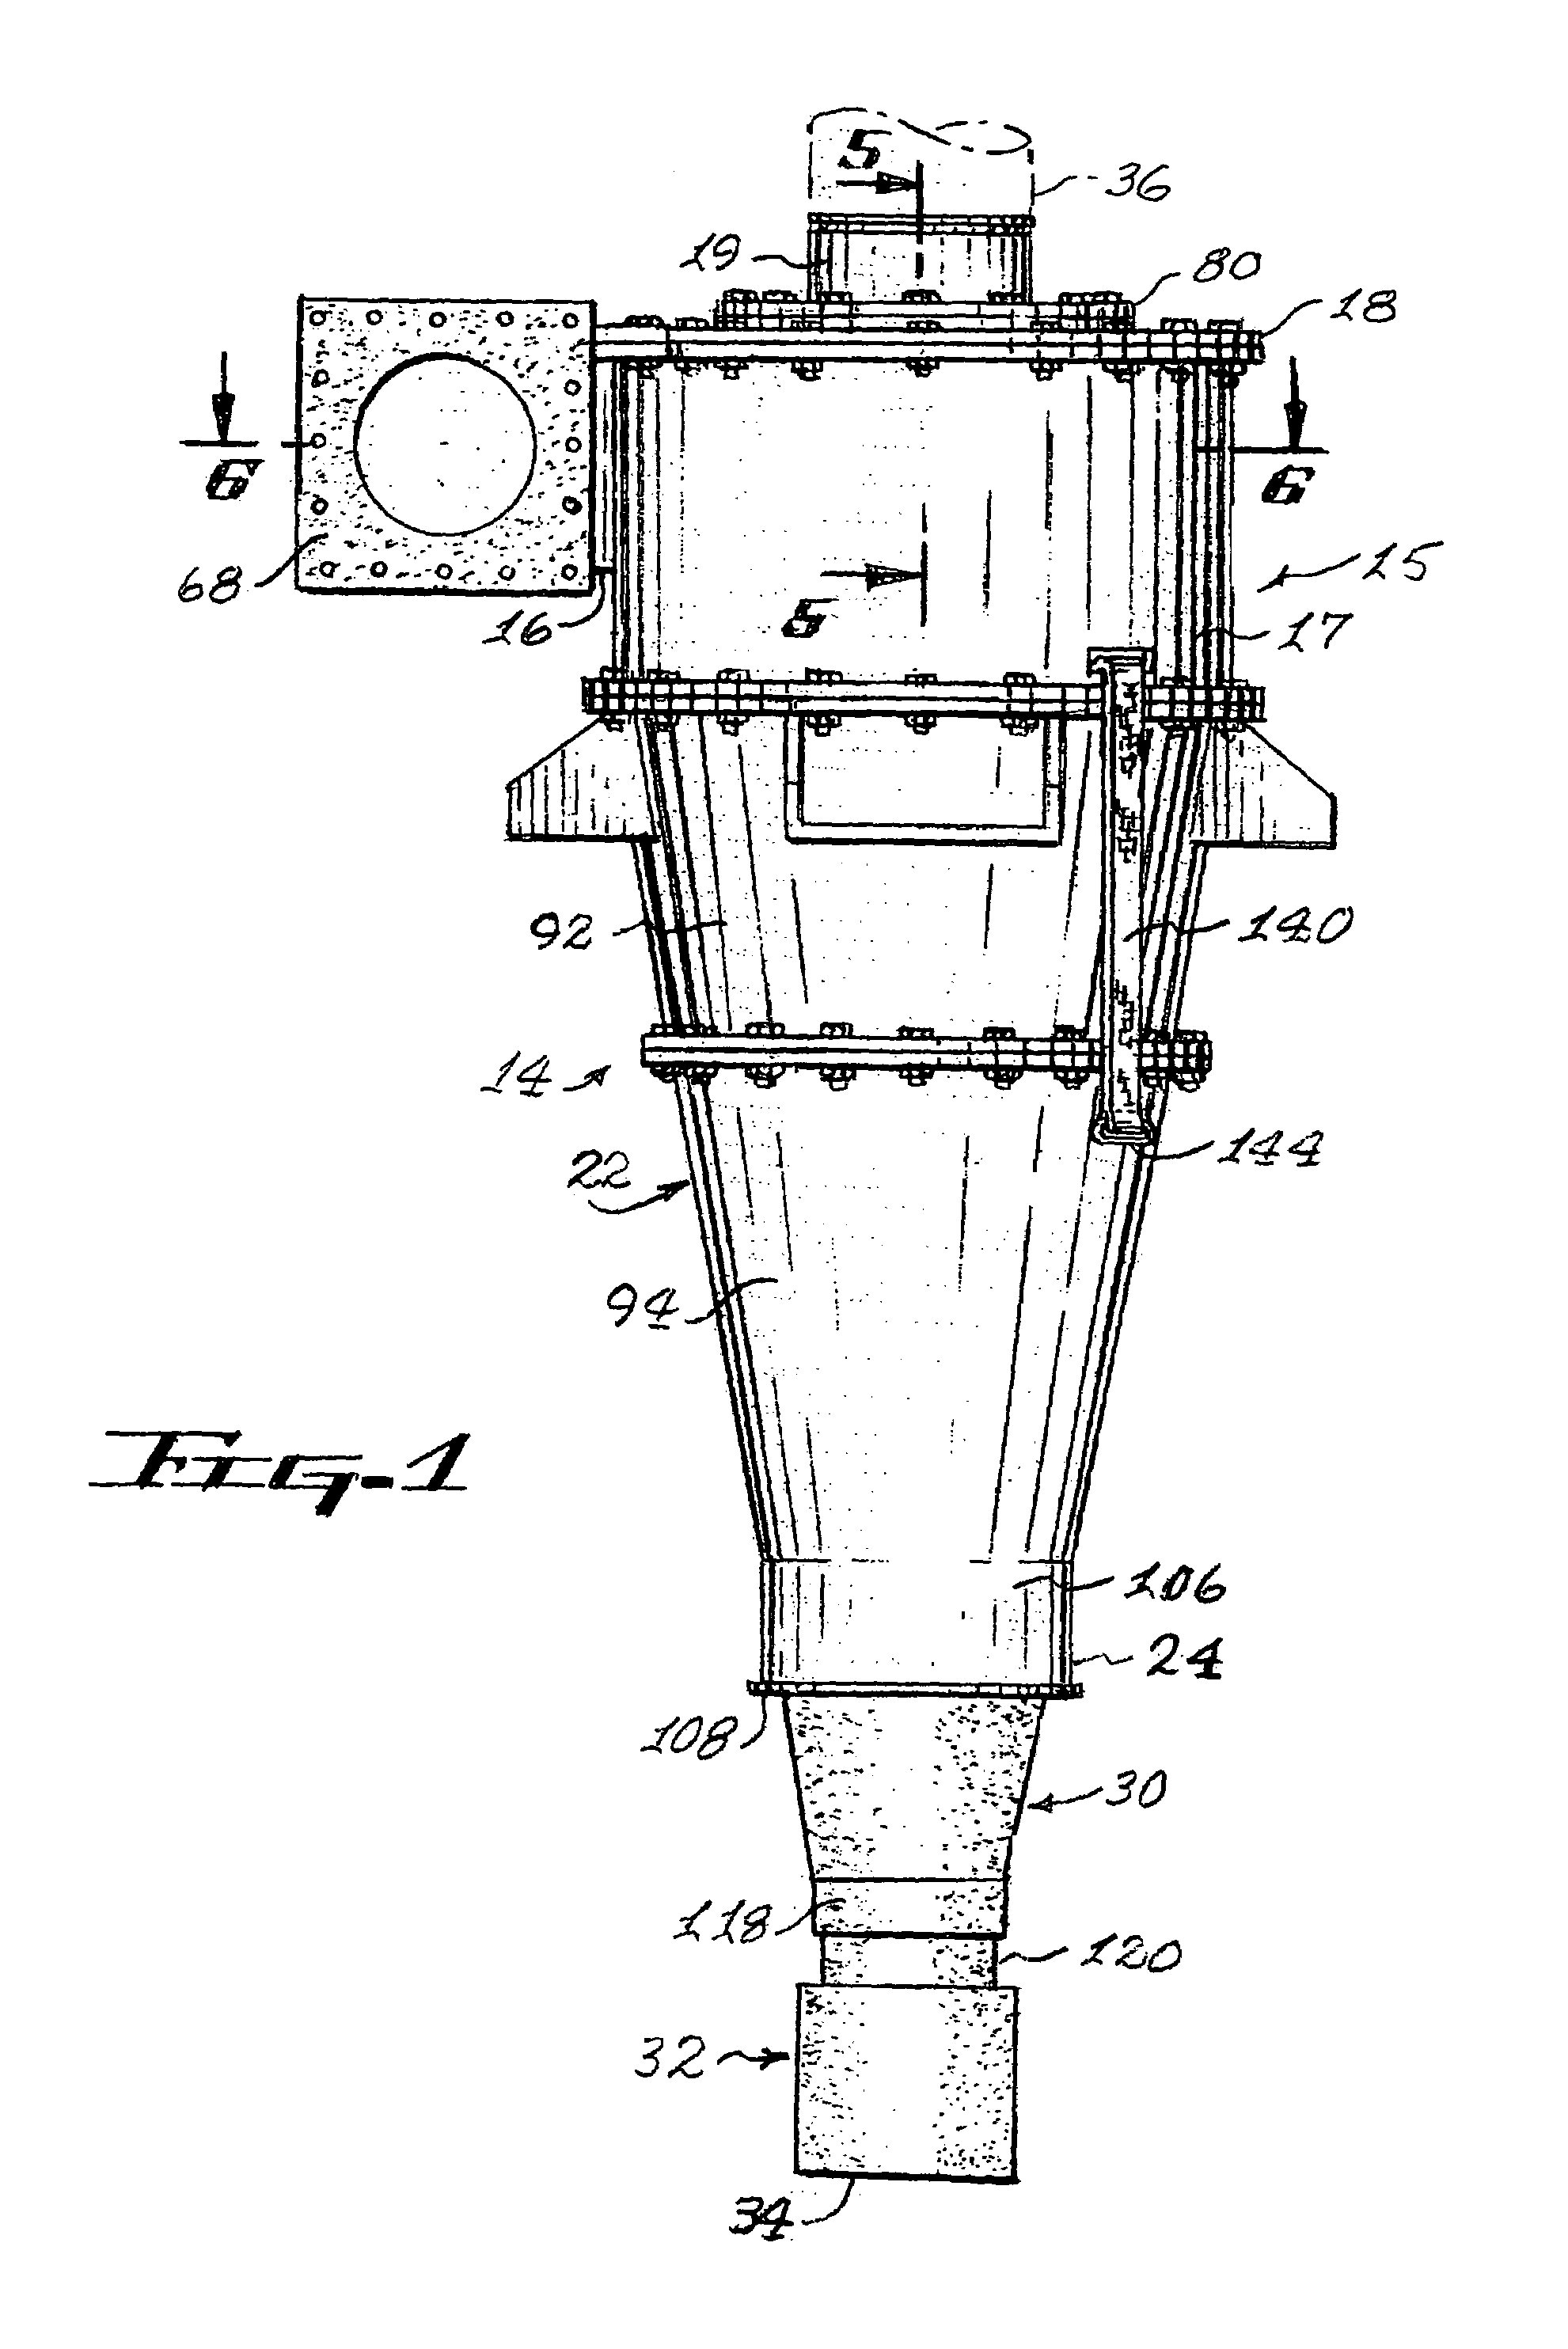 Cyclone with in-situ replaceable liner system and method for accomplishing same